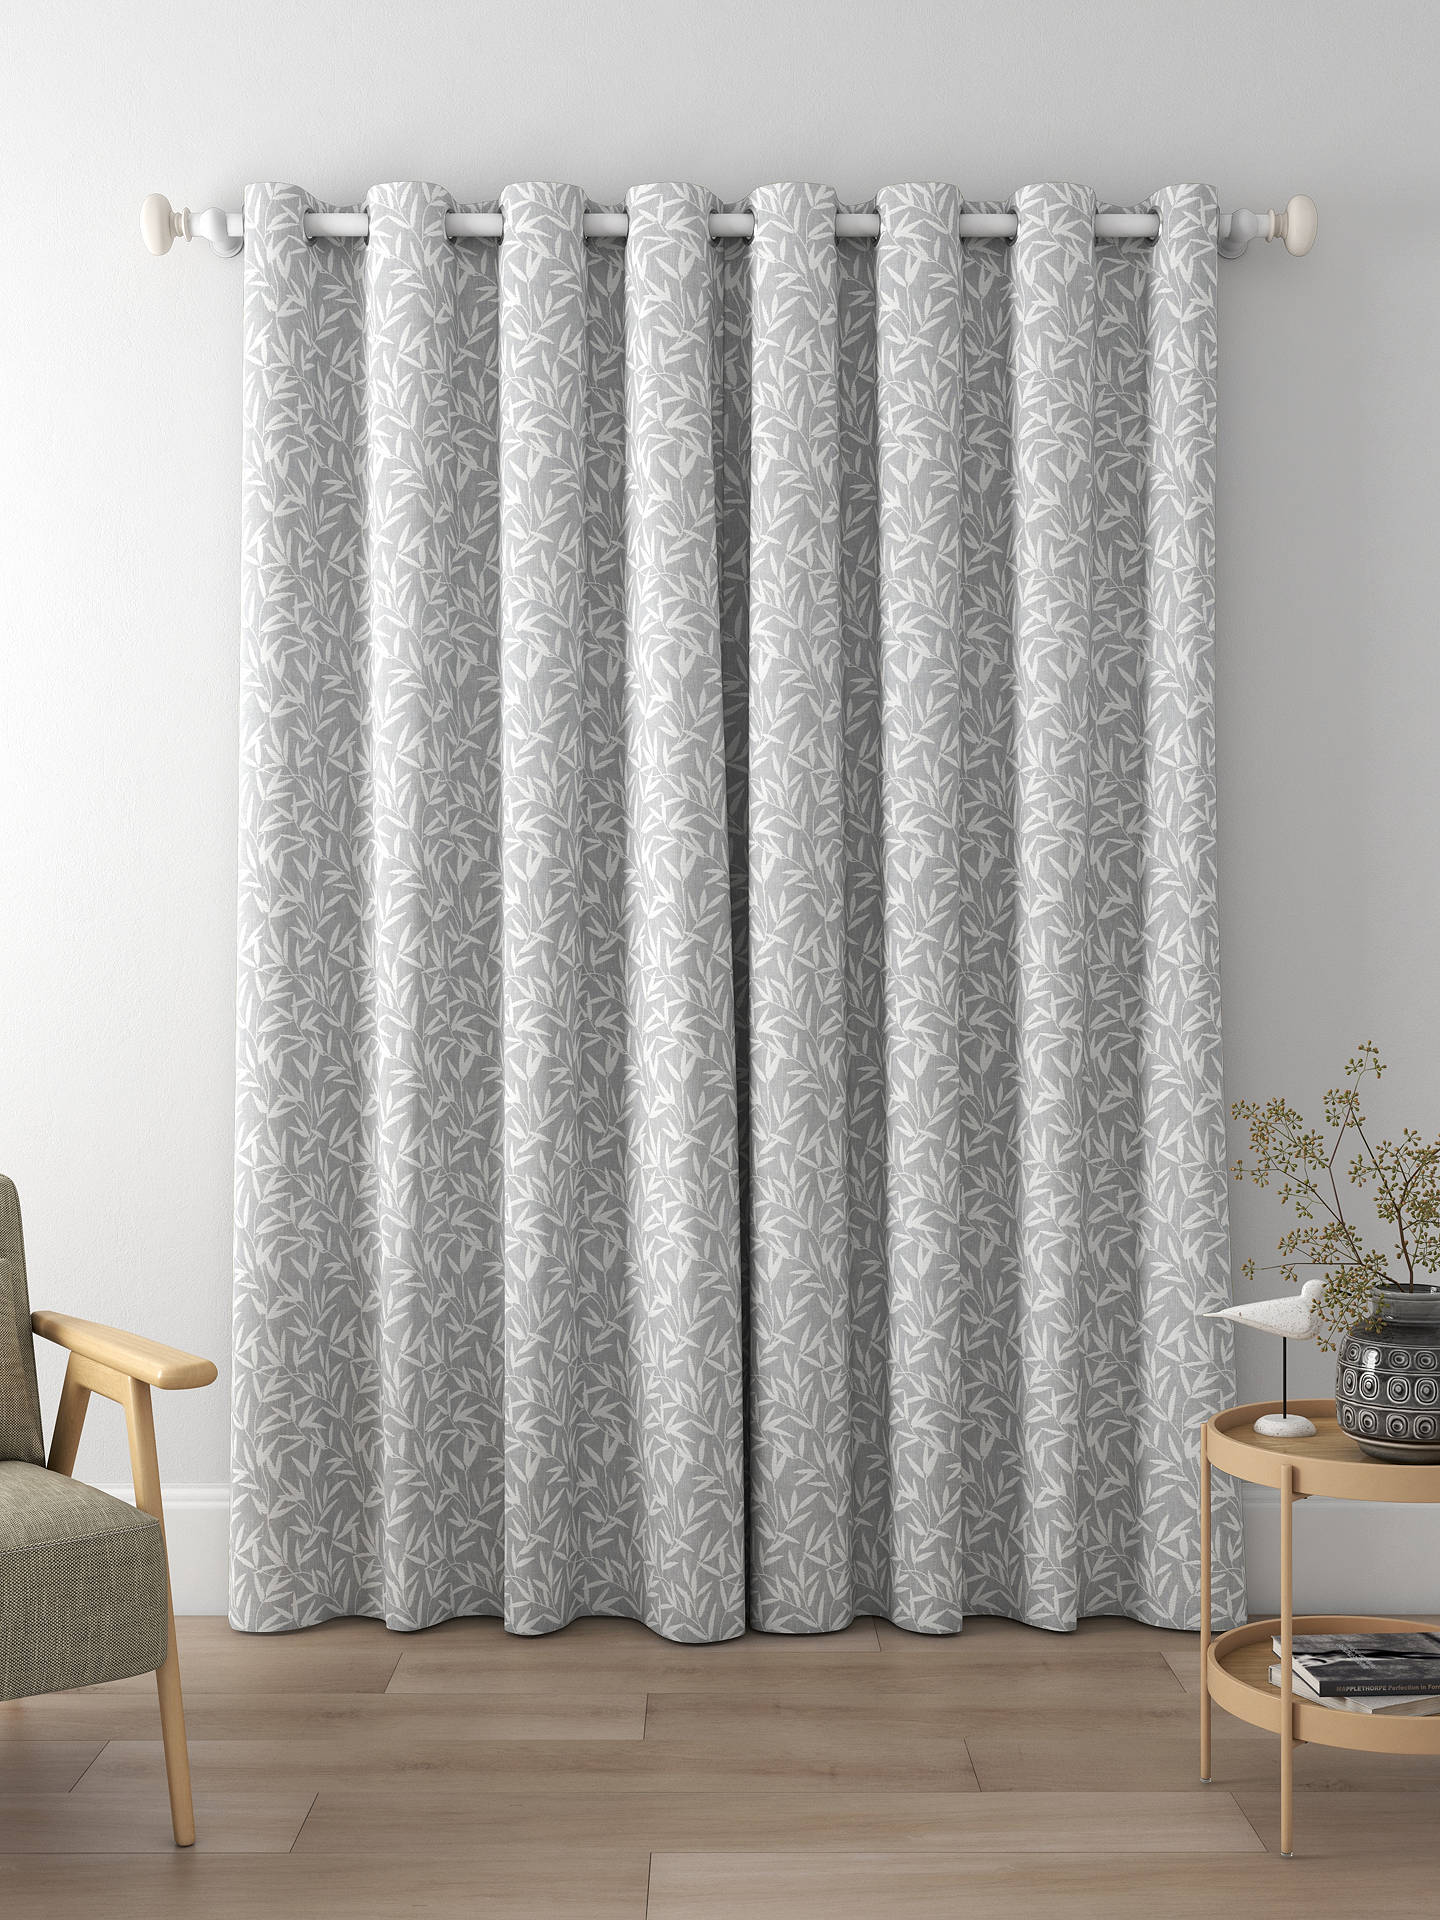 Laura Ashley Willow Leaf Chenille Made to Measure Curtains, Steel